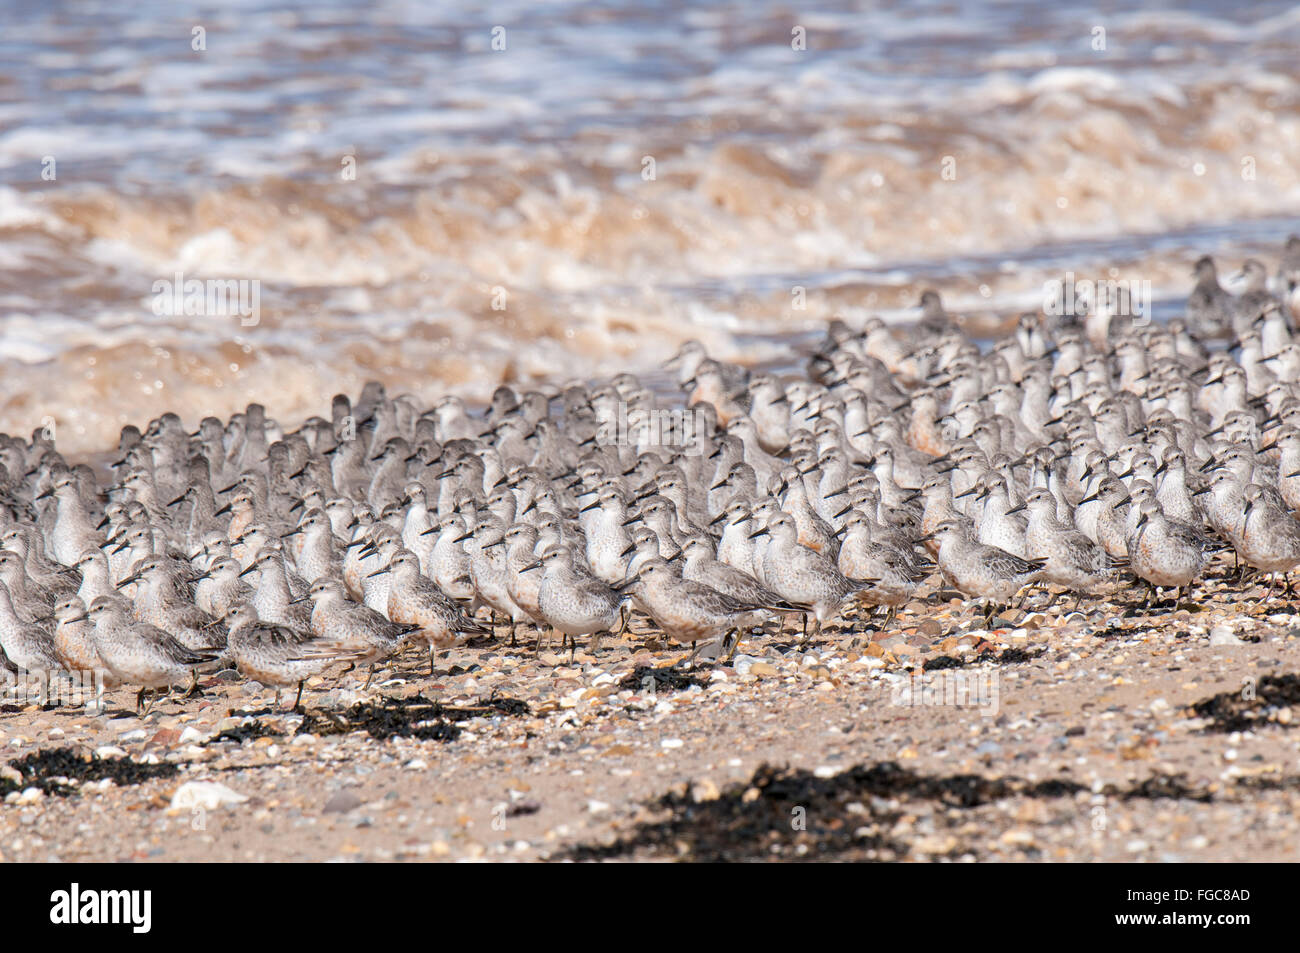 A flock of knot (Calidris canutus) walking along a beach at the edge of the Humber Estuary at Spurn Point, East Yorkshire. Septe Stock Photo